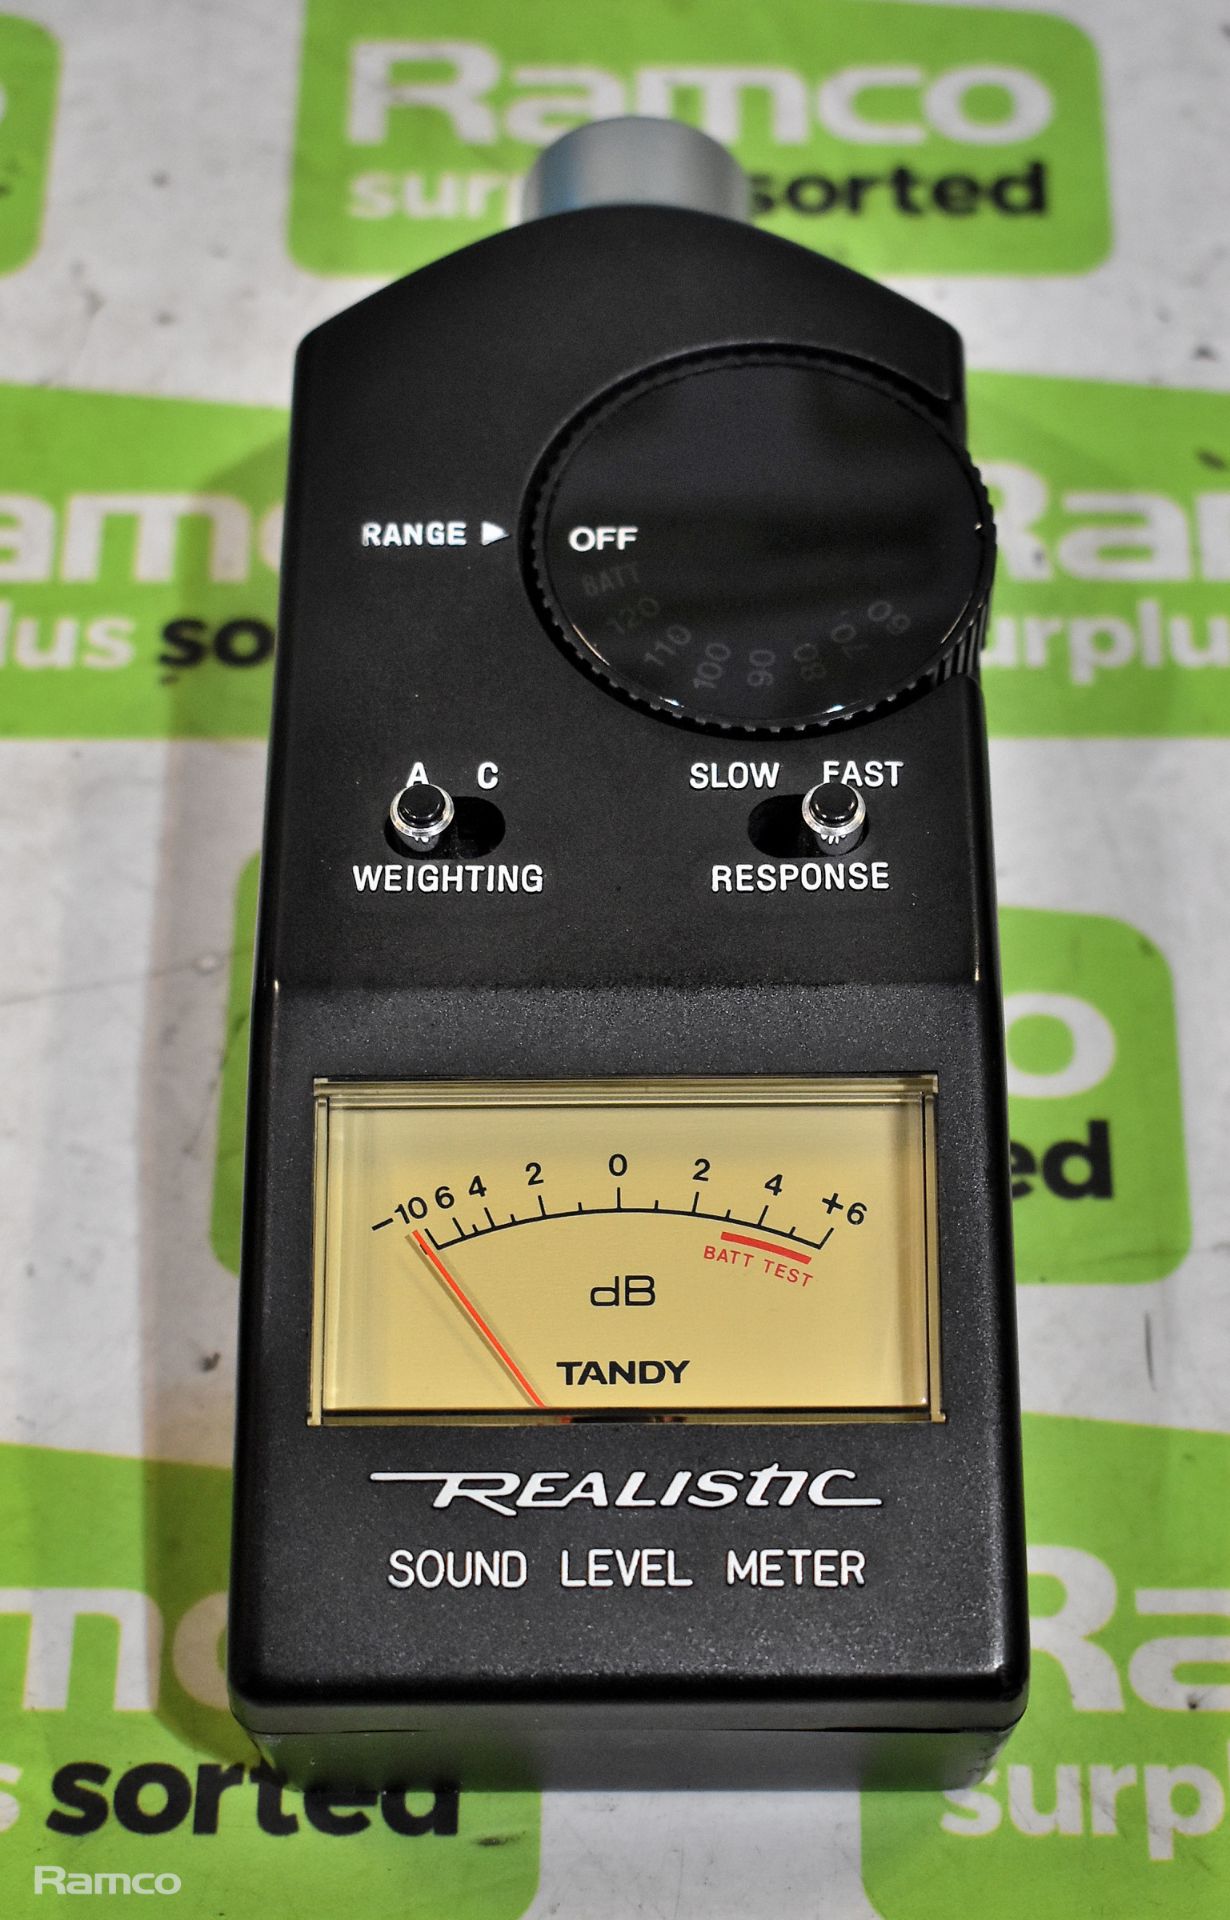 Realistic No. 33-2050 sound level meter - Image 2 of 3